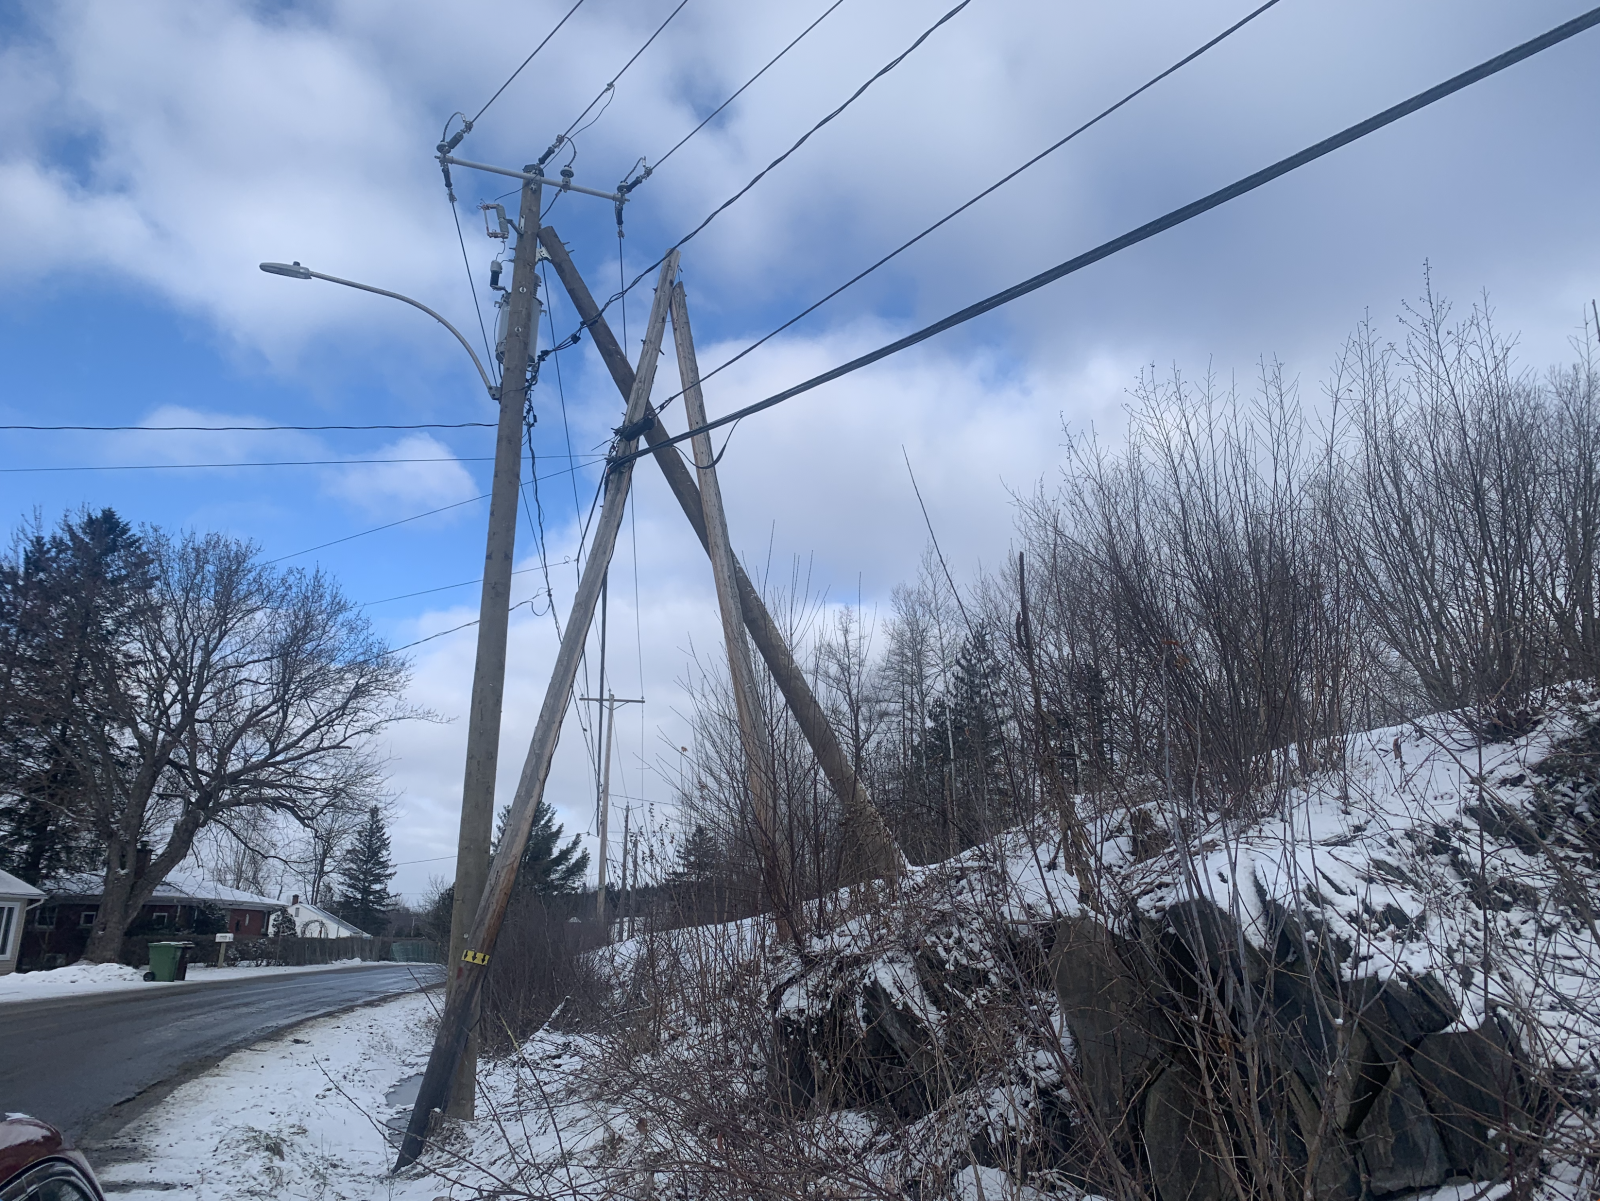 The Hydro pole that made Record history